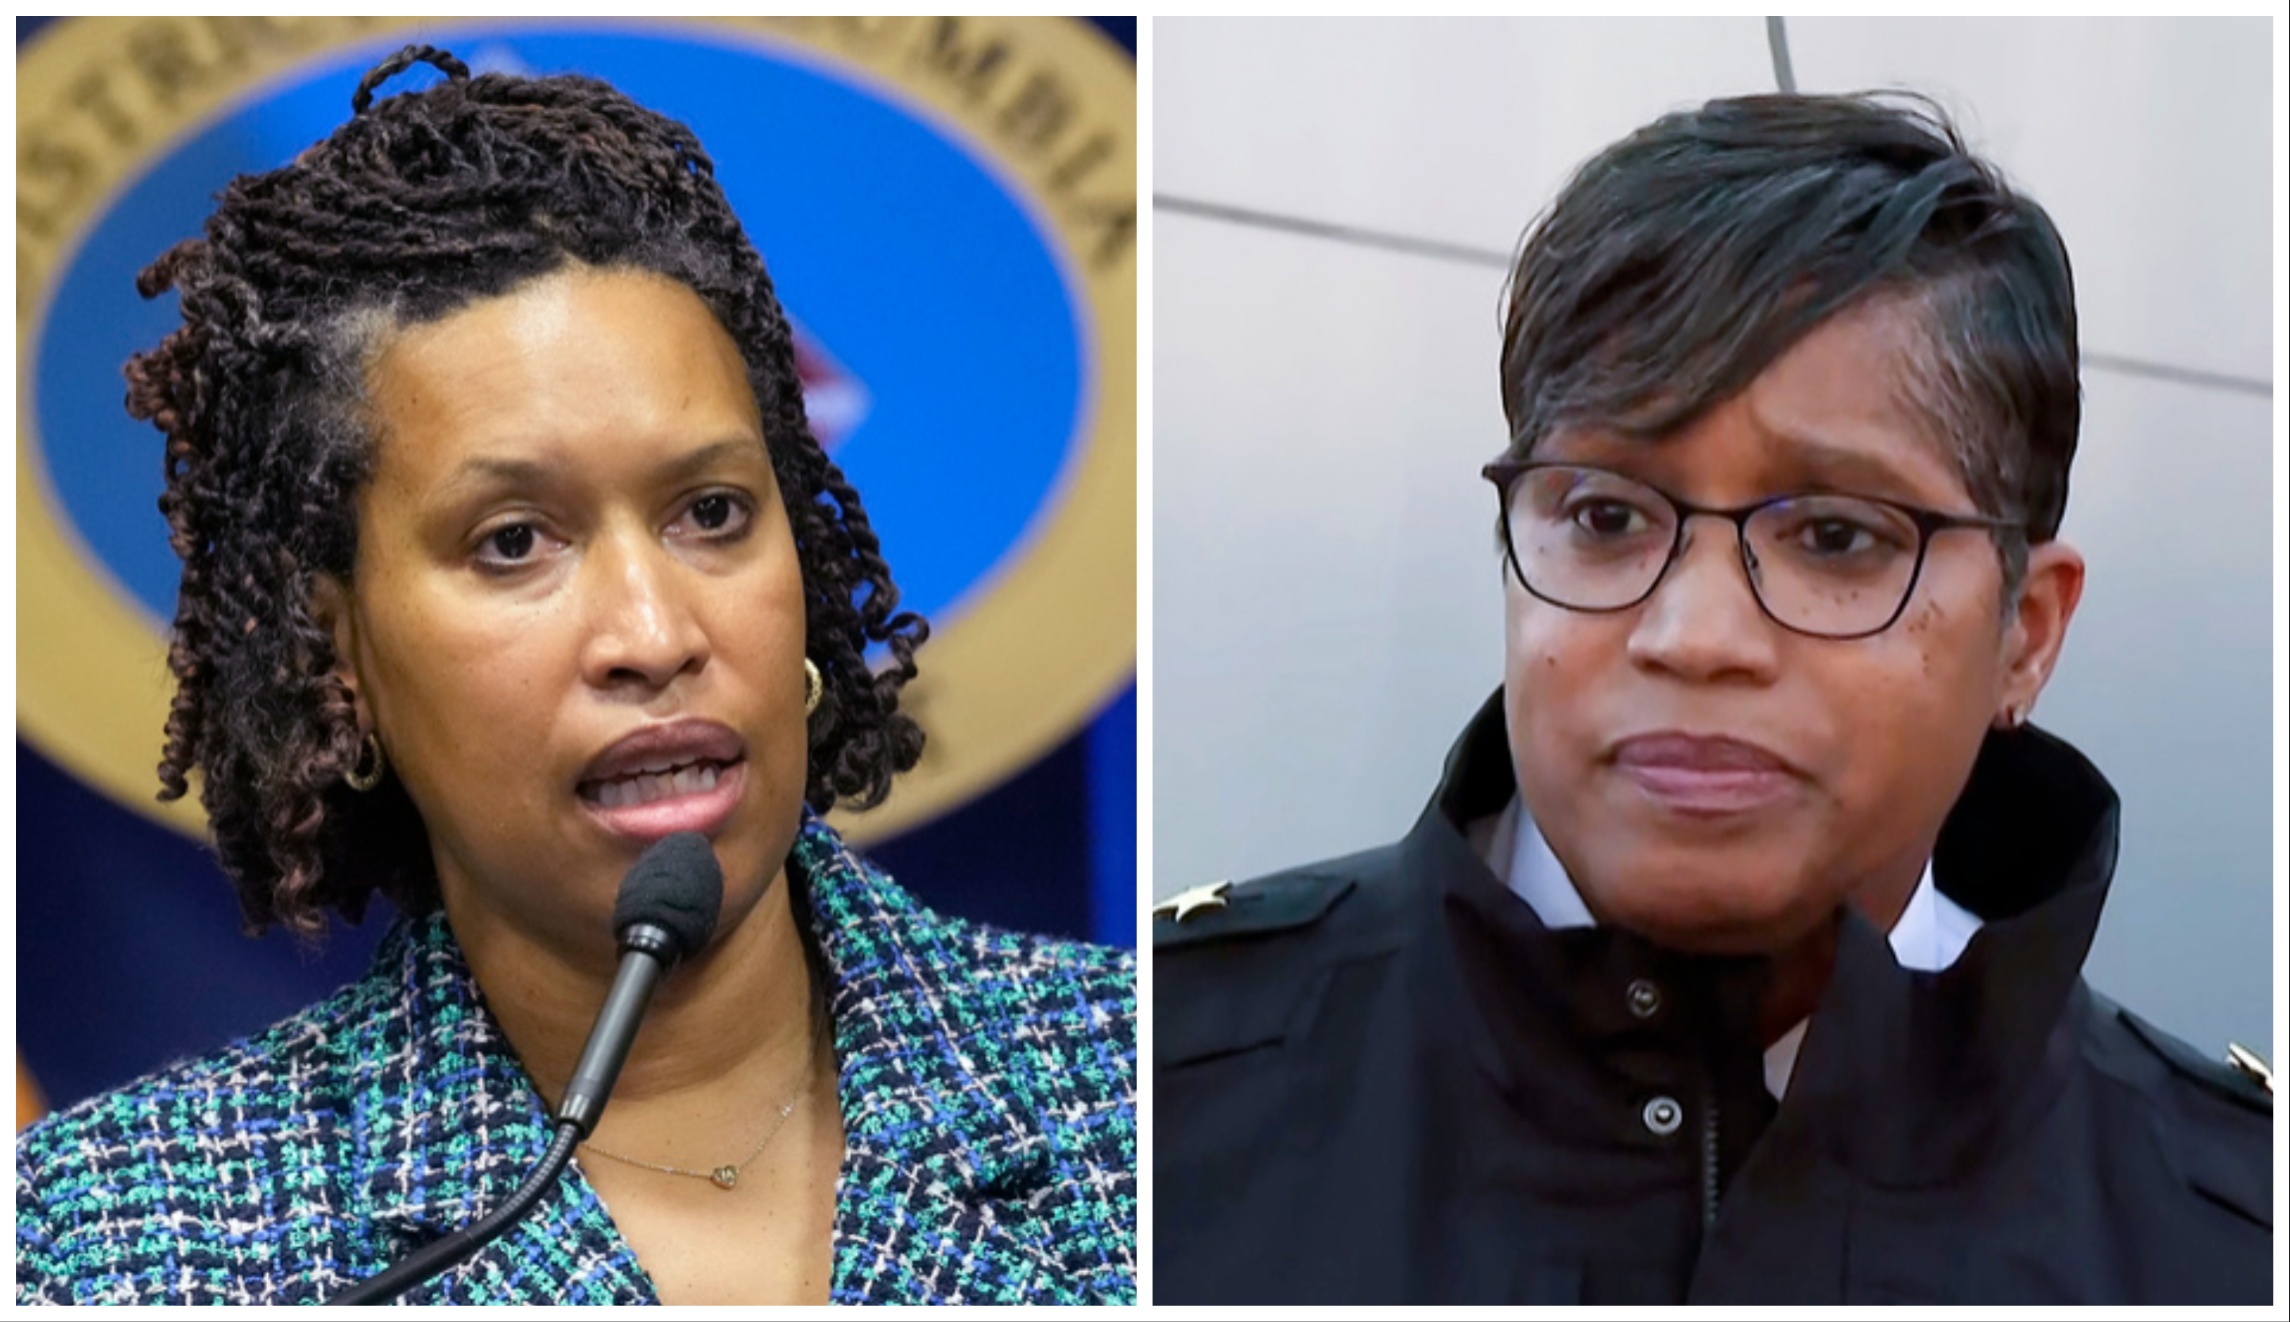 DC Mayor Bowser and police chief to testify to Congress on GWU campus protests – Washington Examiner